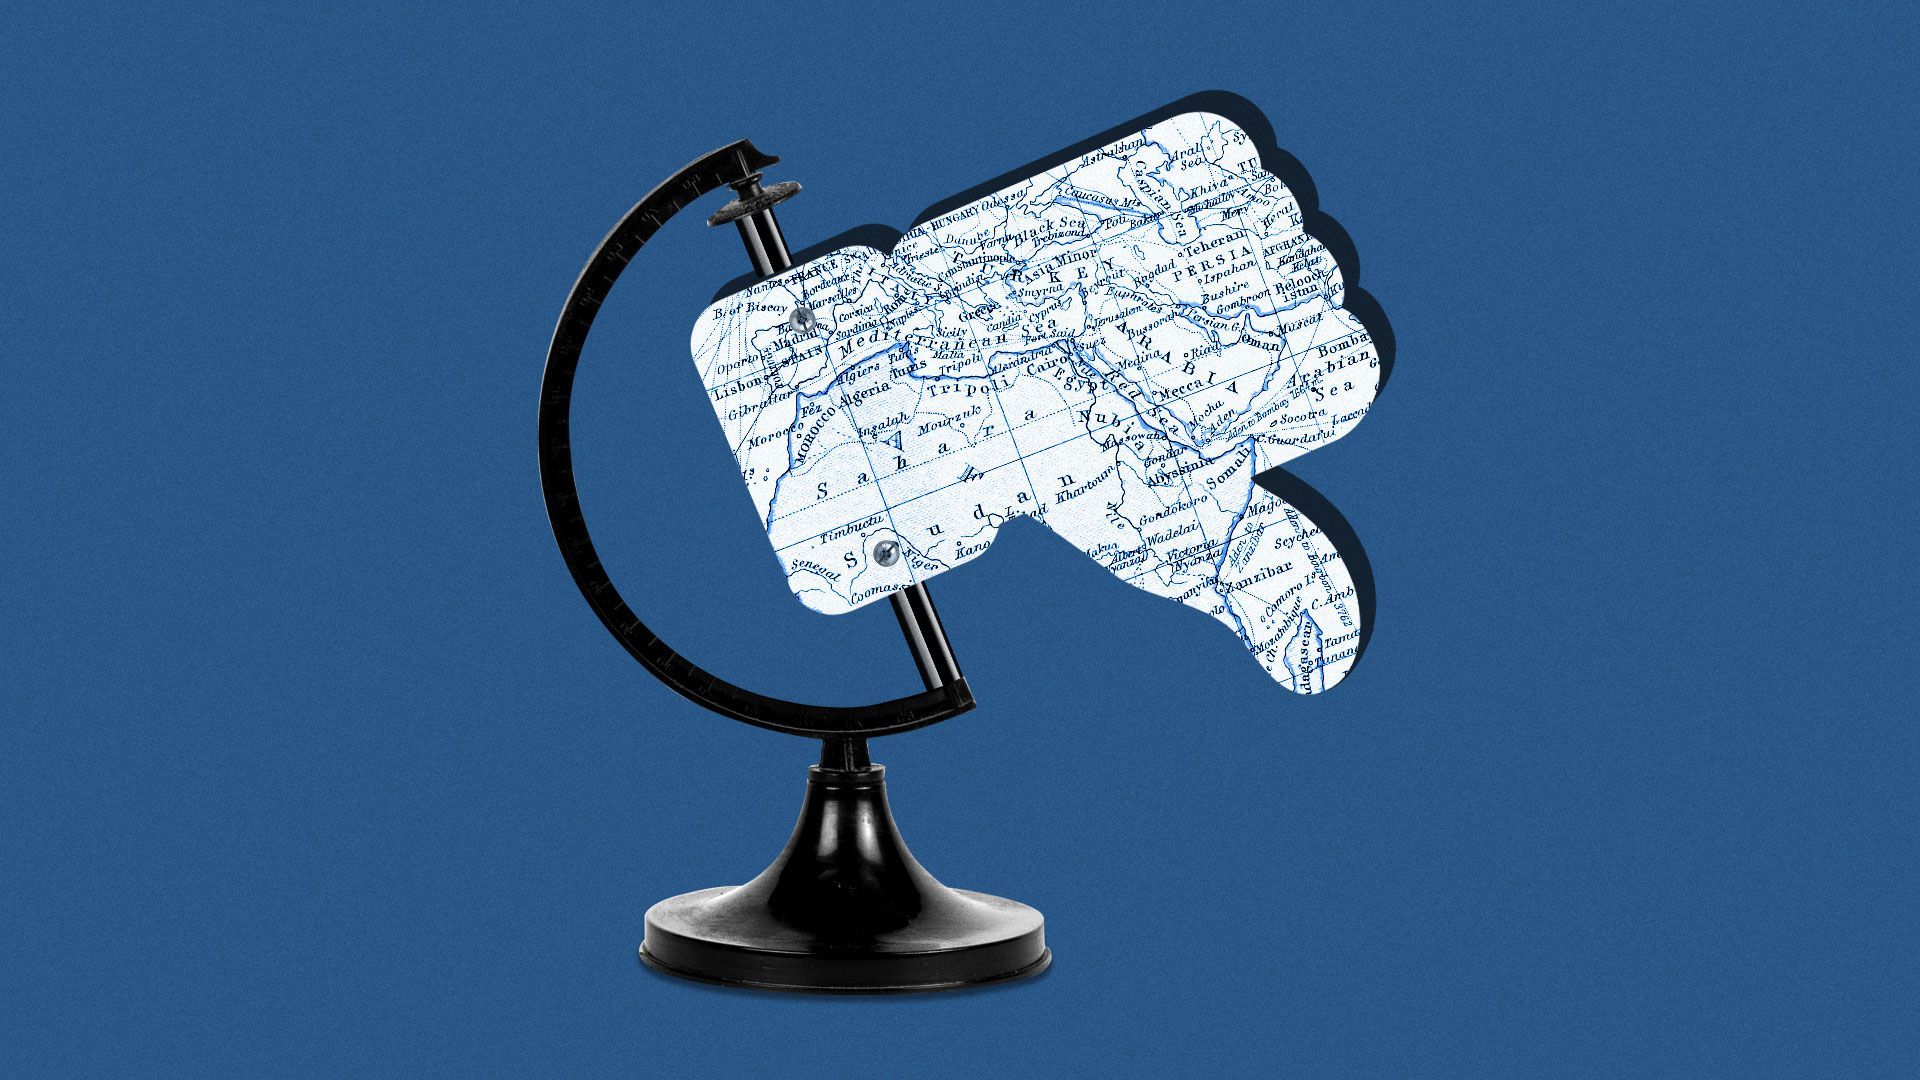 Illustration of globe with a Facebook thumbs down icon